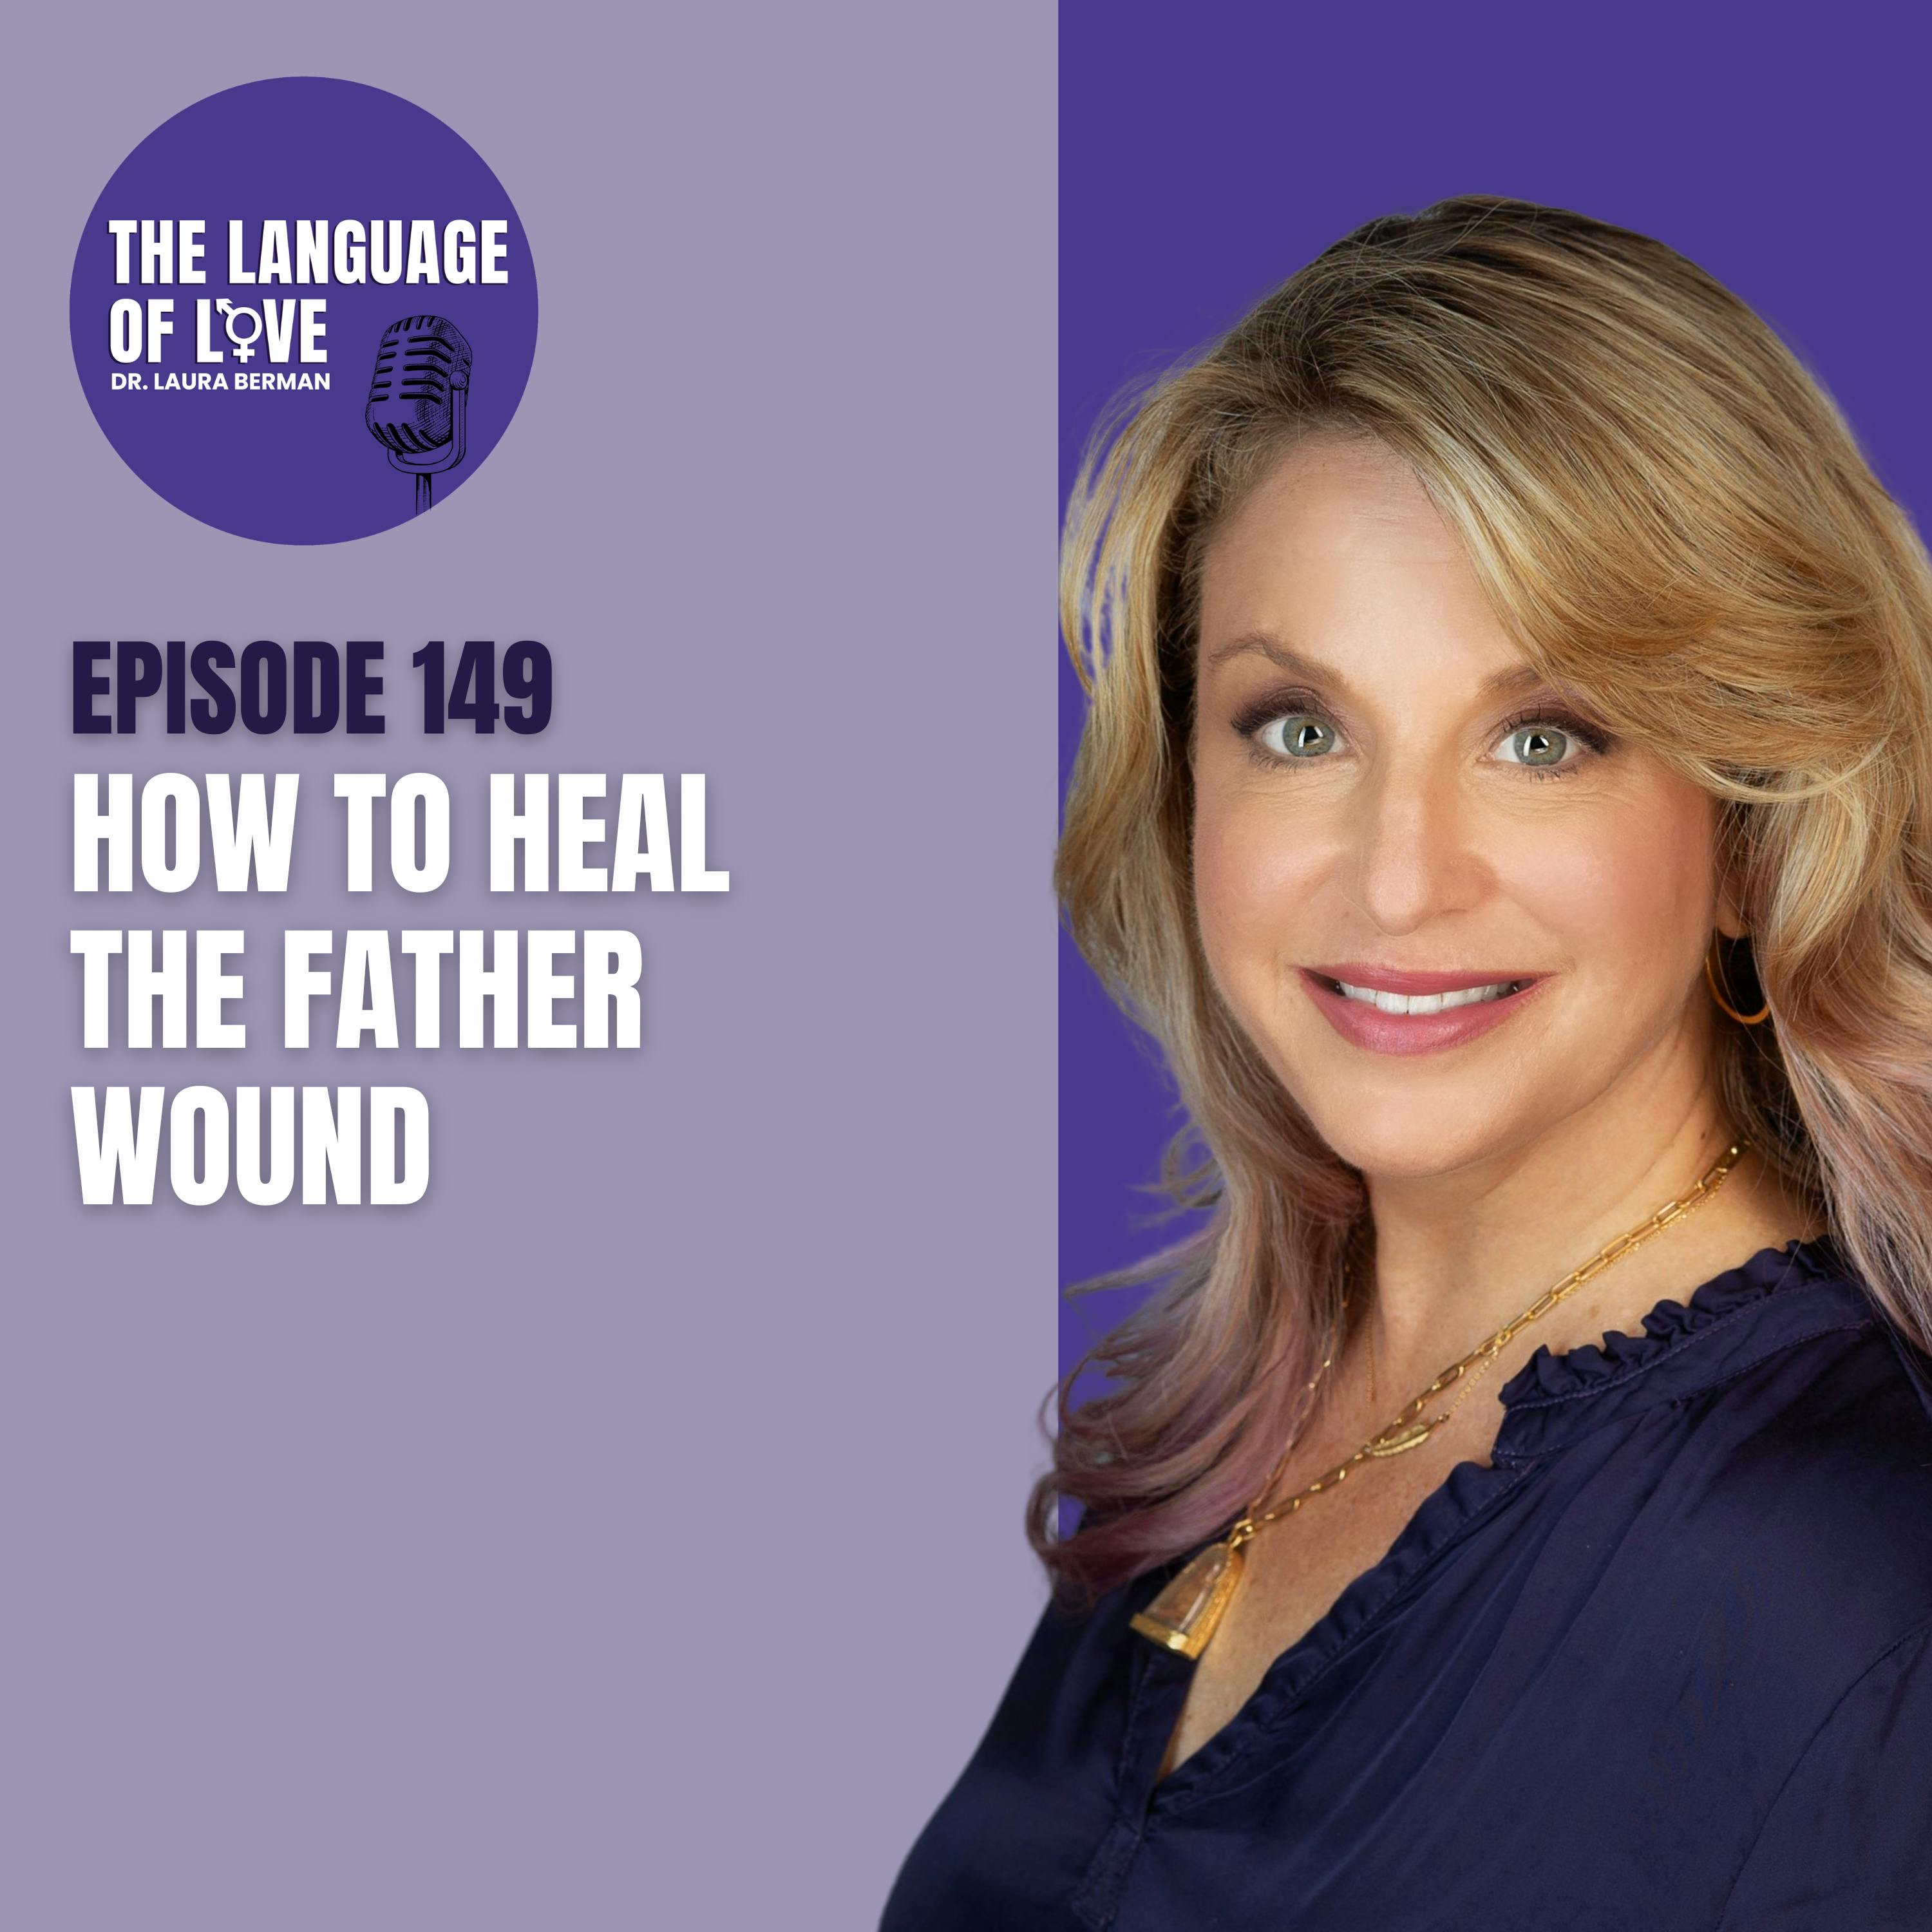 How to Heal the Father Wound